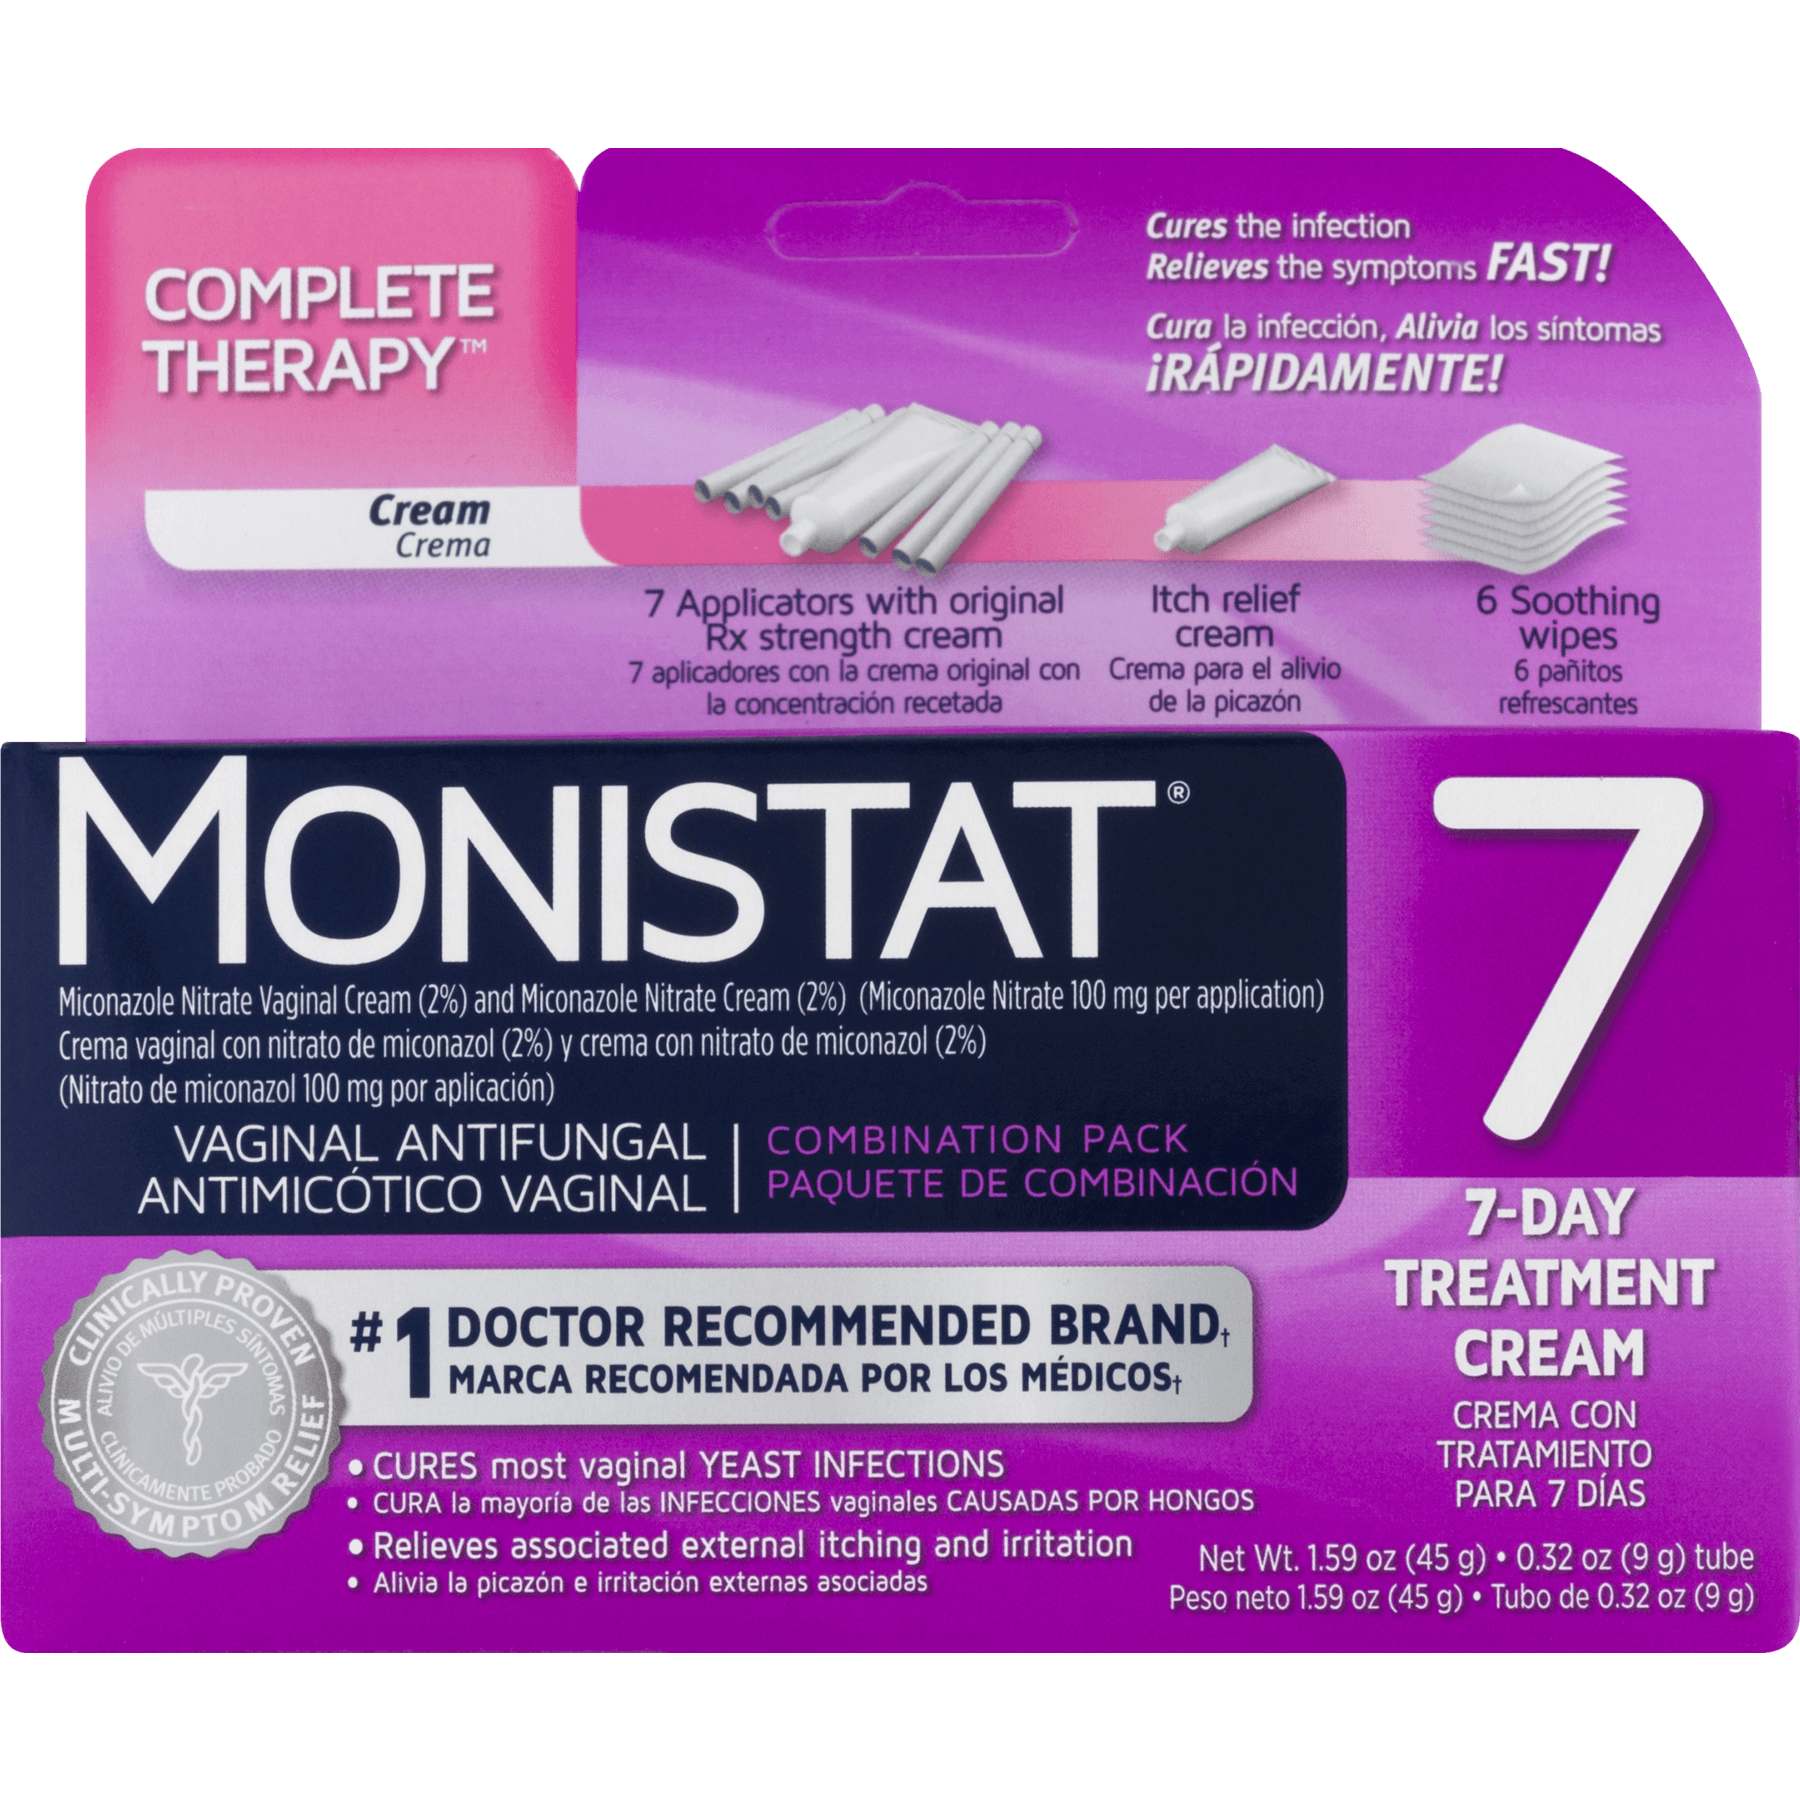 Monistat, Vaginal Antifungal 3-Day Treatment Ovules Complete Pack - image 4 of 8